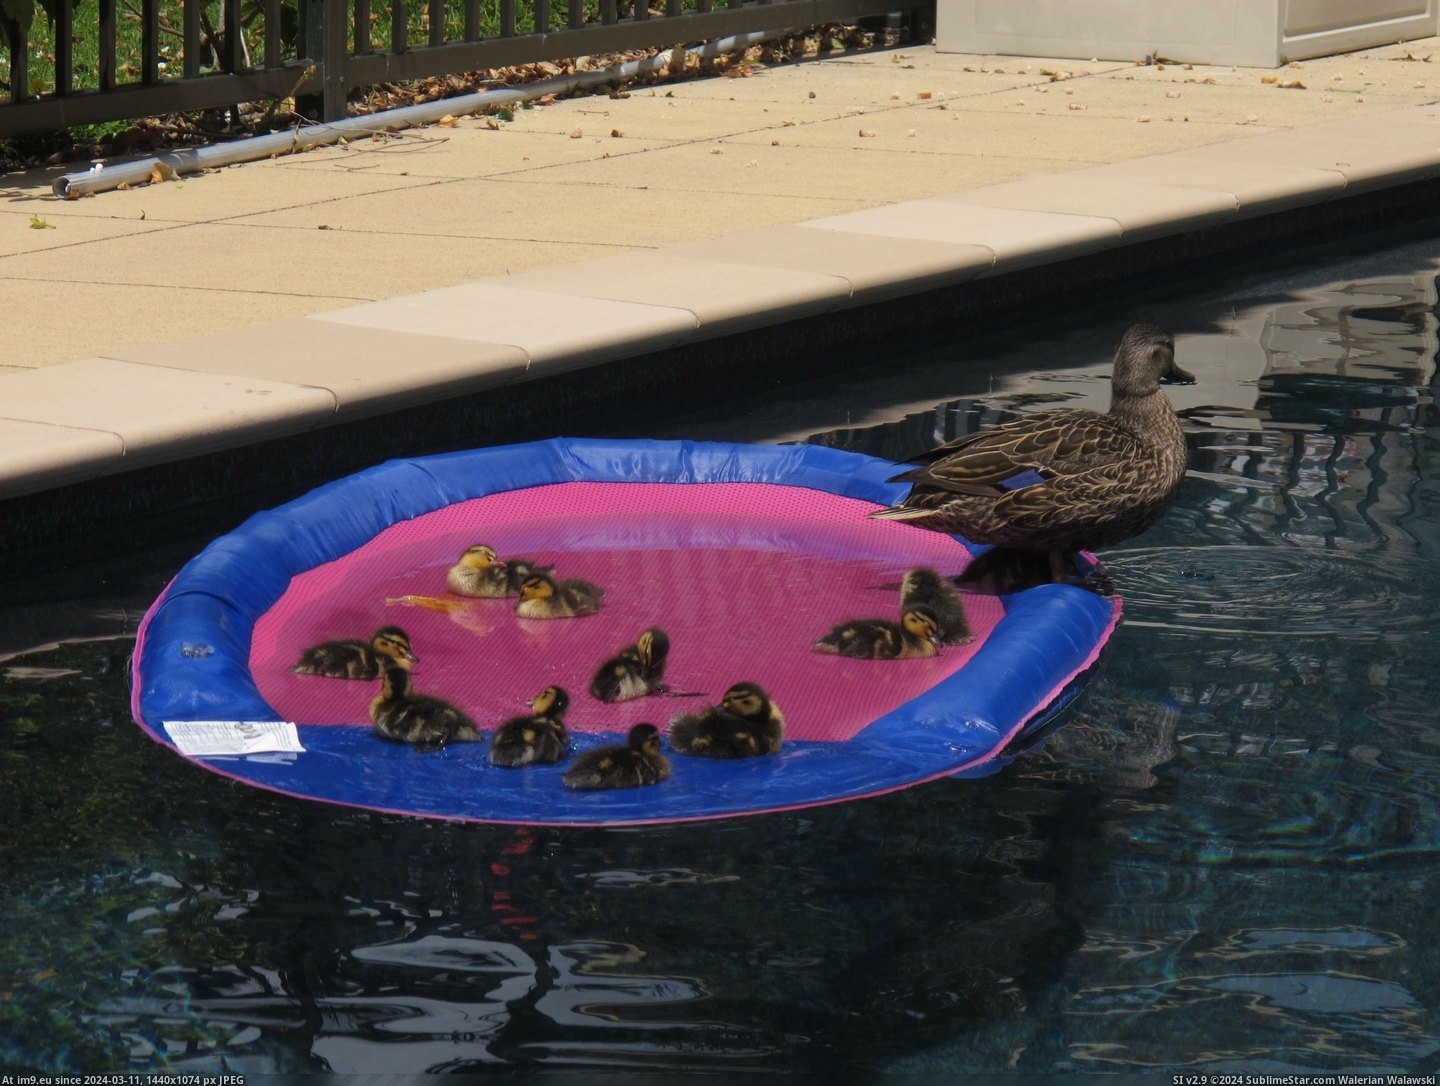 #Life #Out #Pool #Raft #Ducklings #Our #Too #Jump [Aww] We found ducklings in our pool. Were too little to jump out, so we sent in a life raft. Pic. (Bild von album My r/AWW favs))